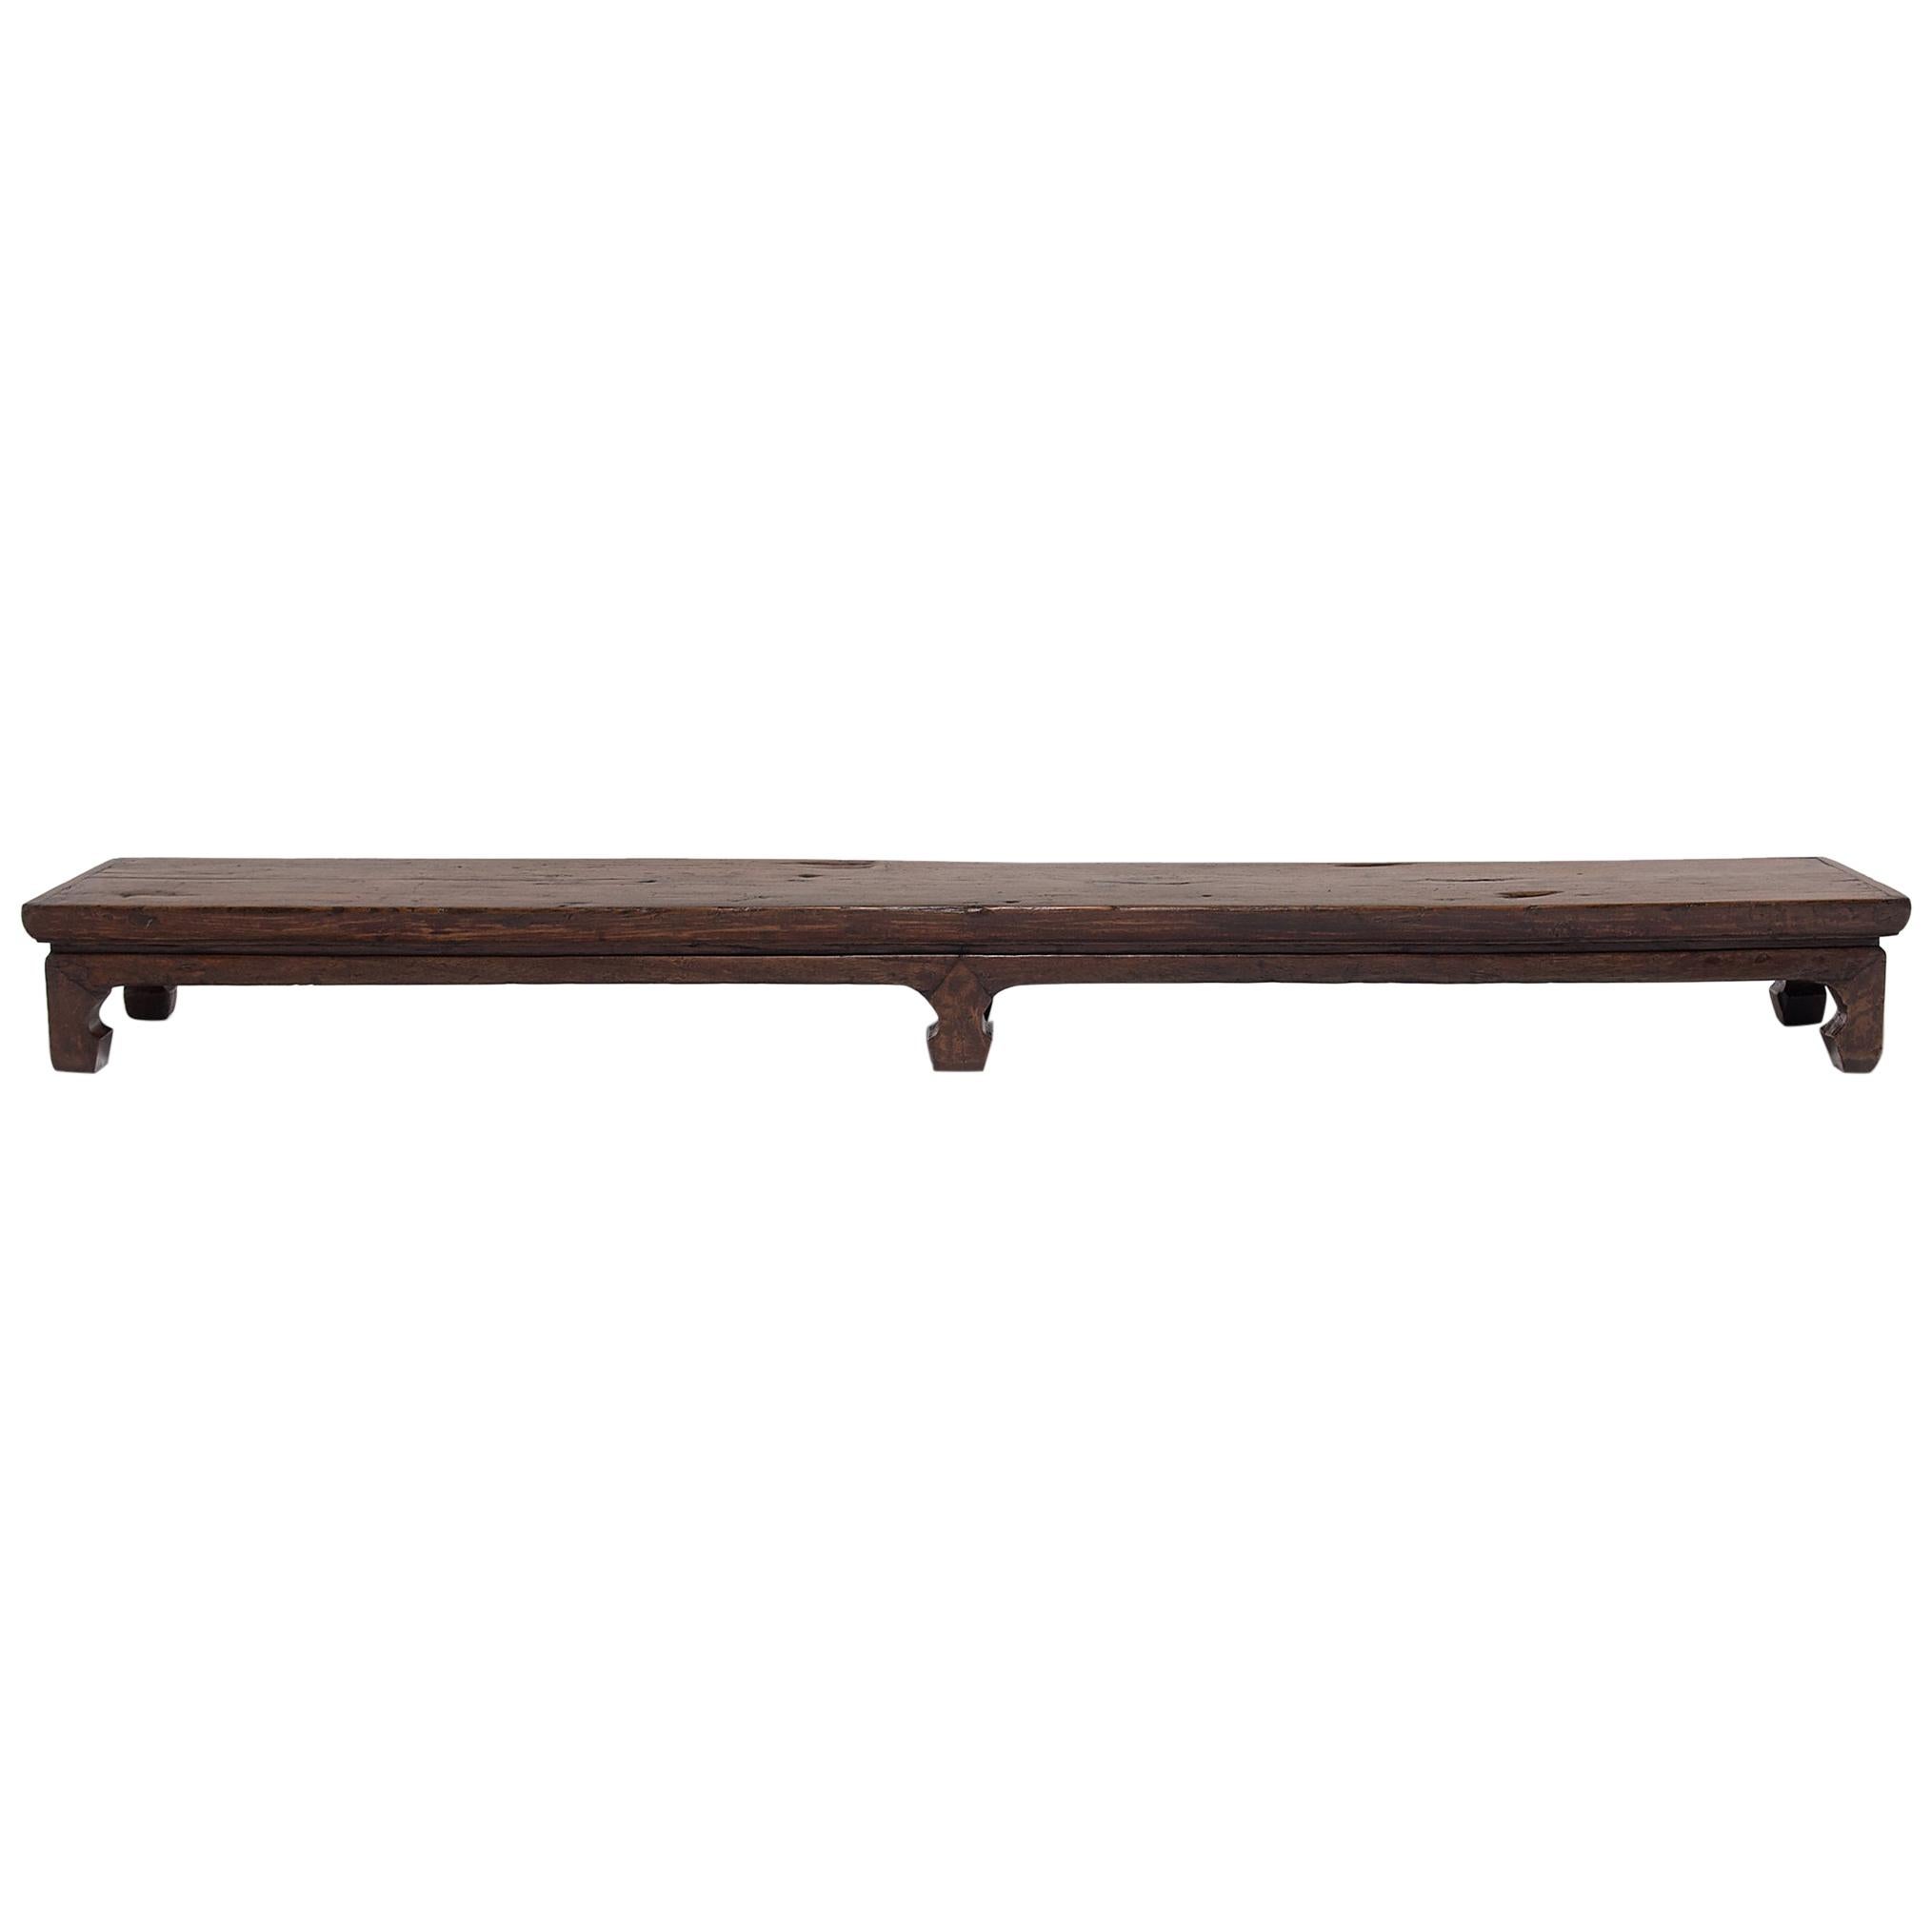 Low Chinese Step Bench, c. 1850